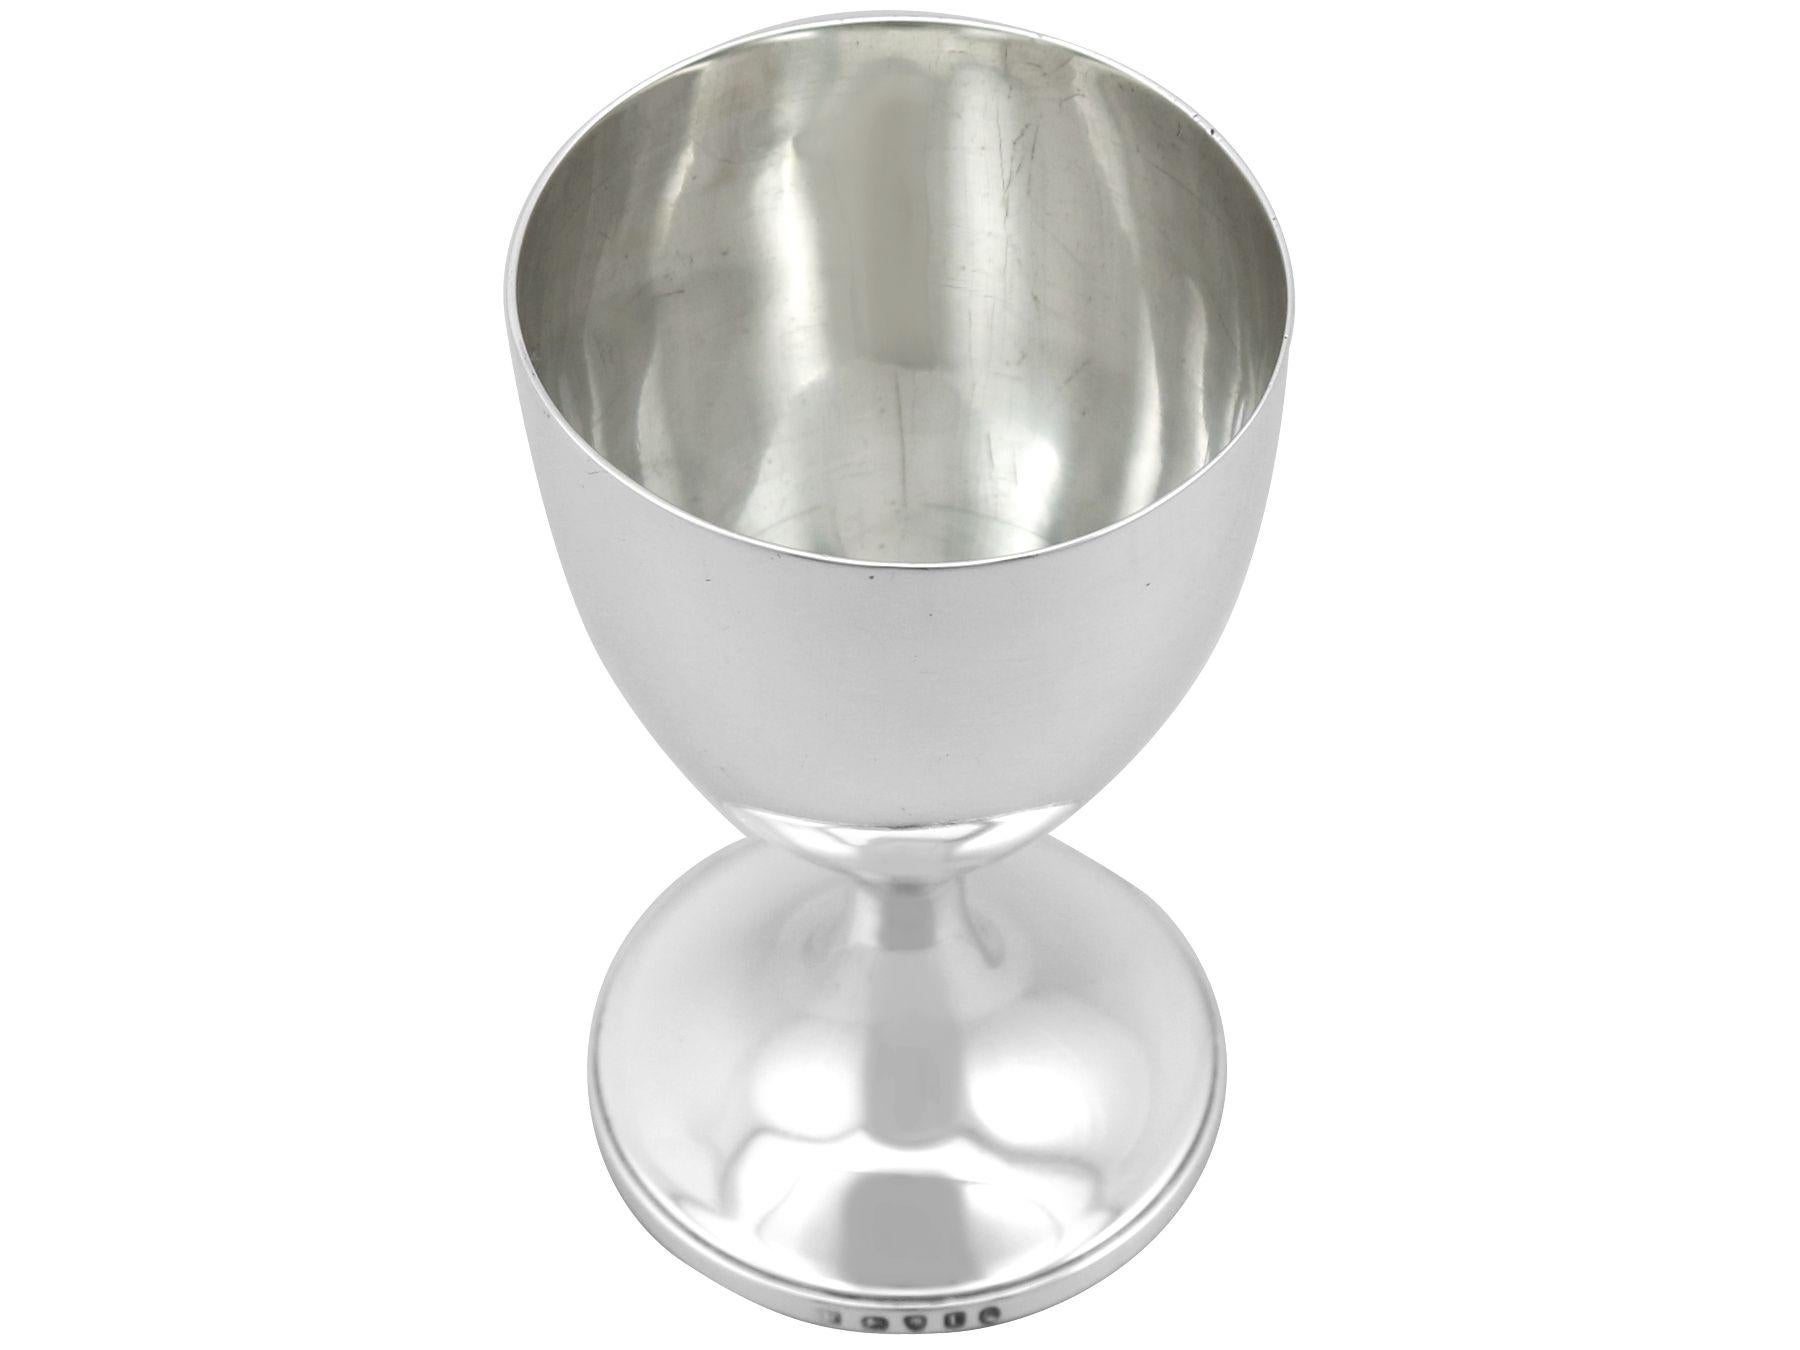 An exceptional, fine and impressive antique Georgian English sterling silver lady's goblet; an addition to our 18th century wine and drinks related silverware collection.

This exceptional antique Georgian sterling silver goblet has a plain